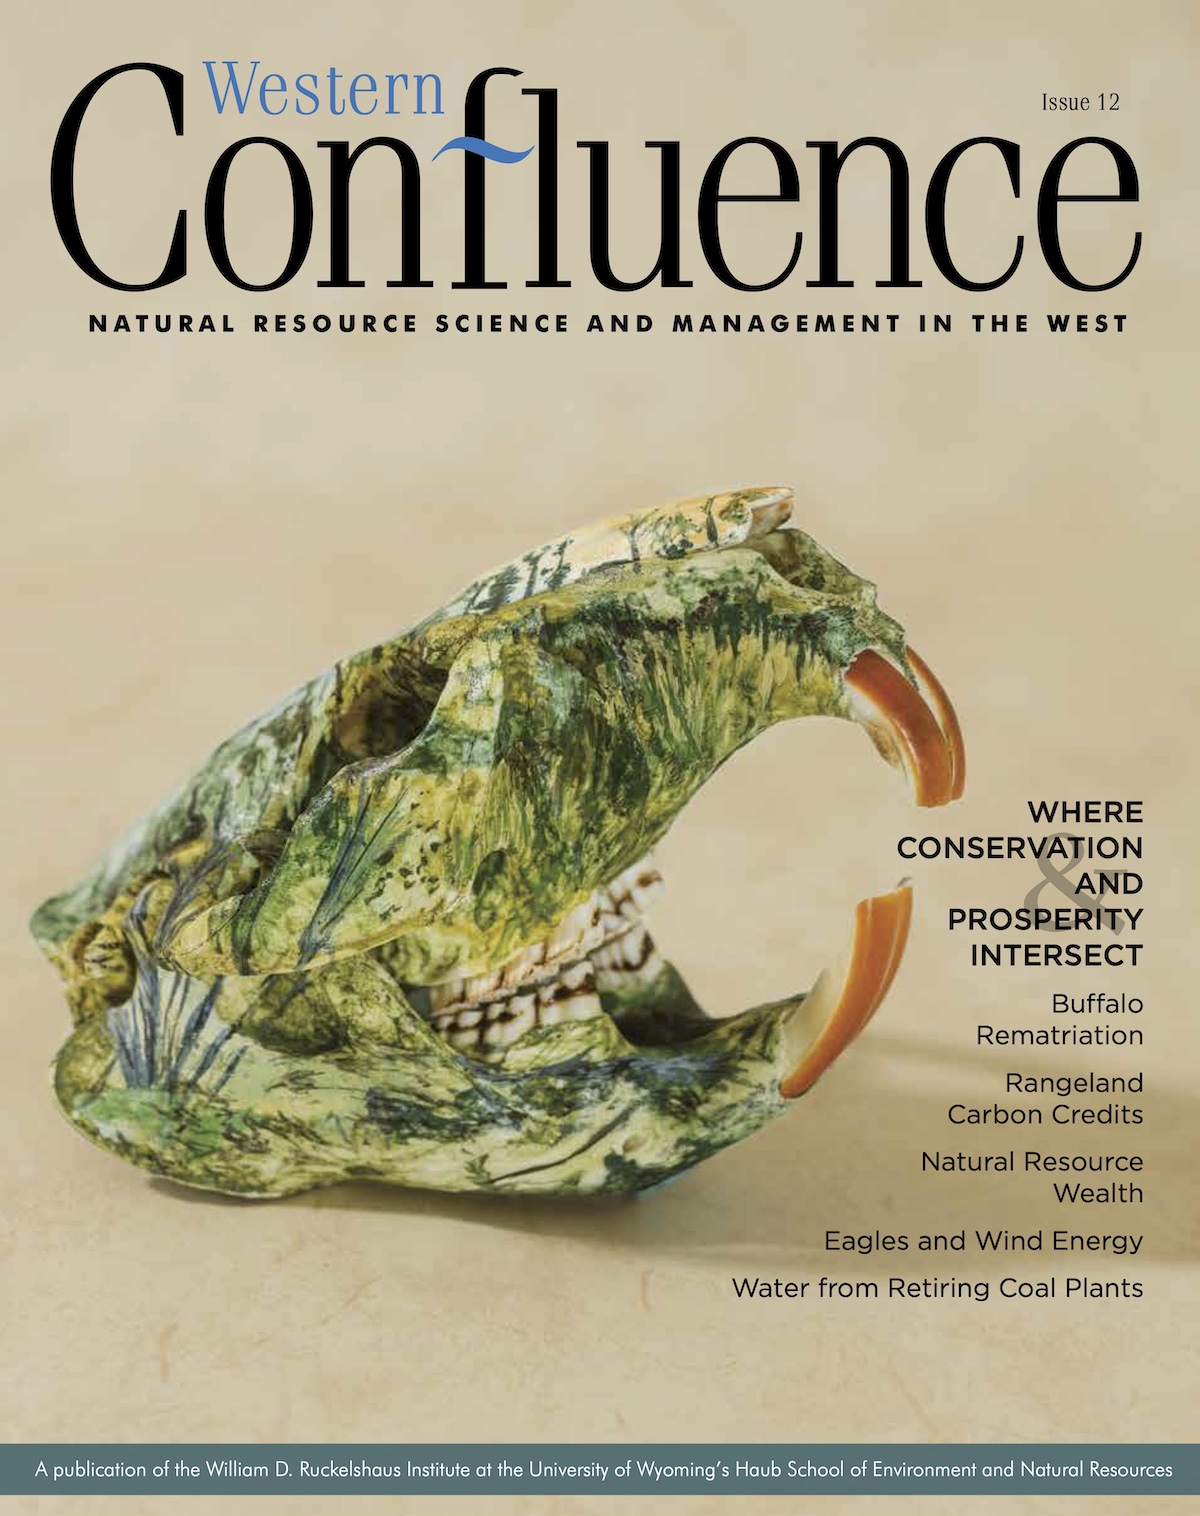 Magazine cover with image of painted beaver skull.